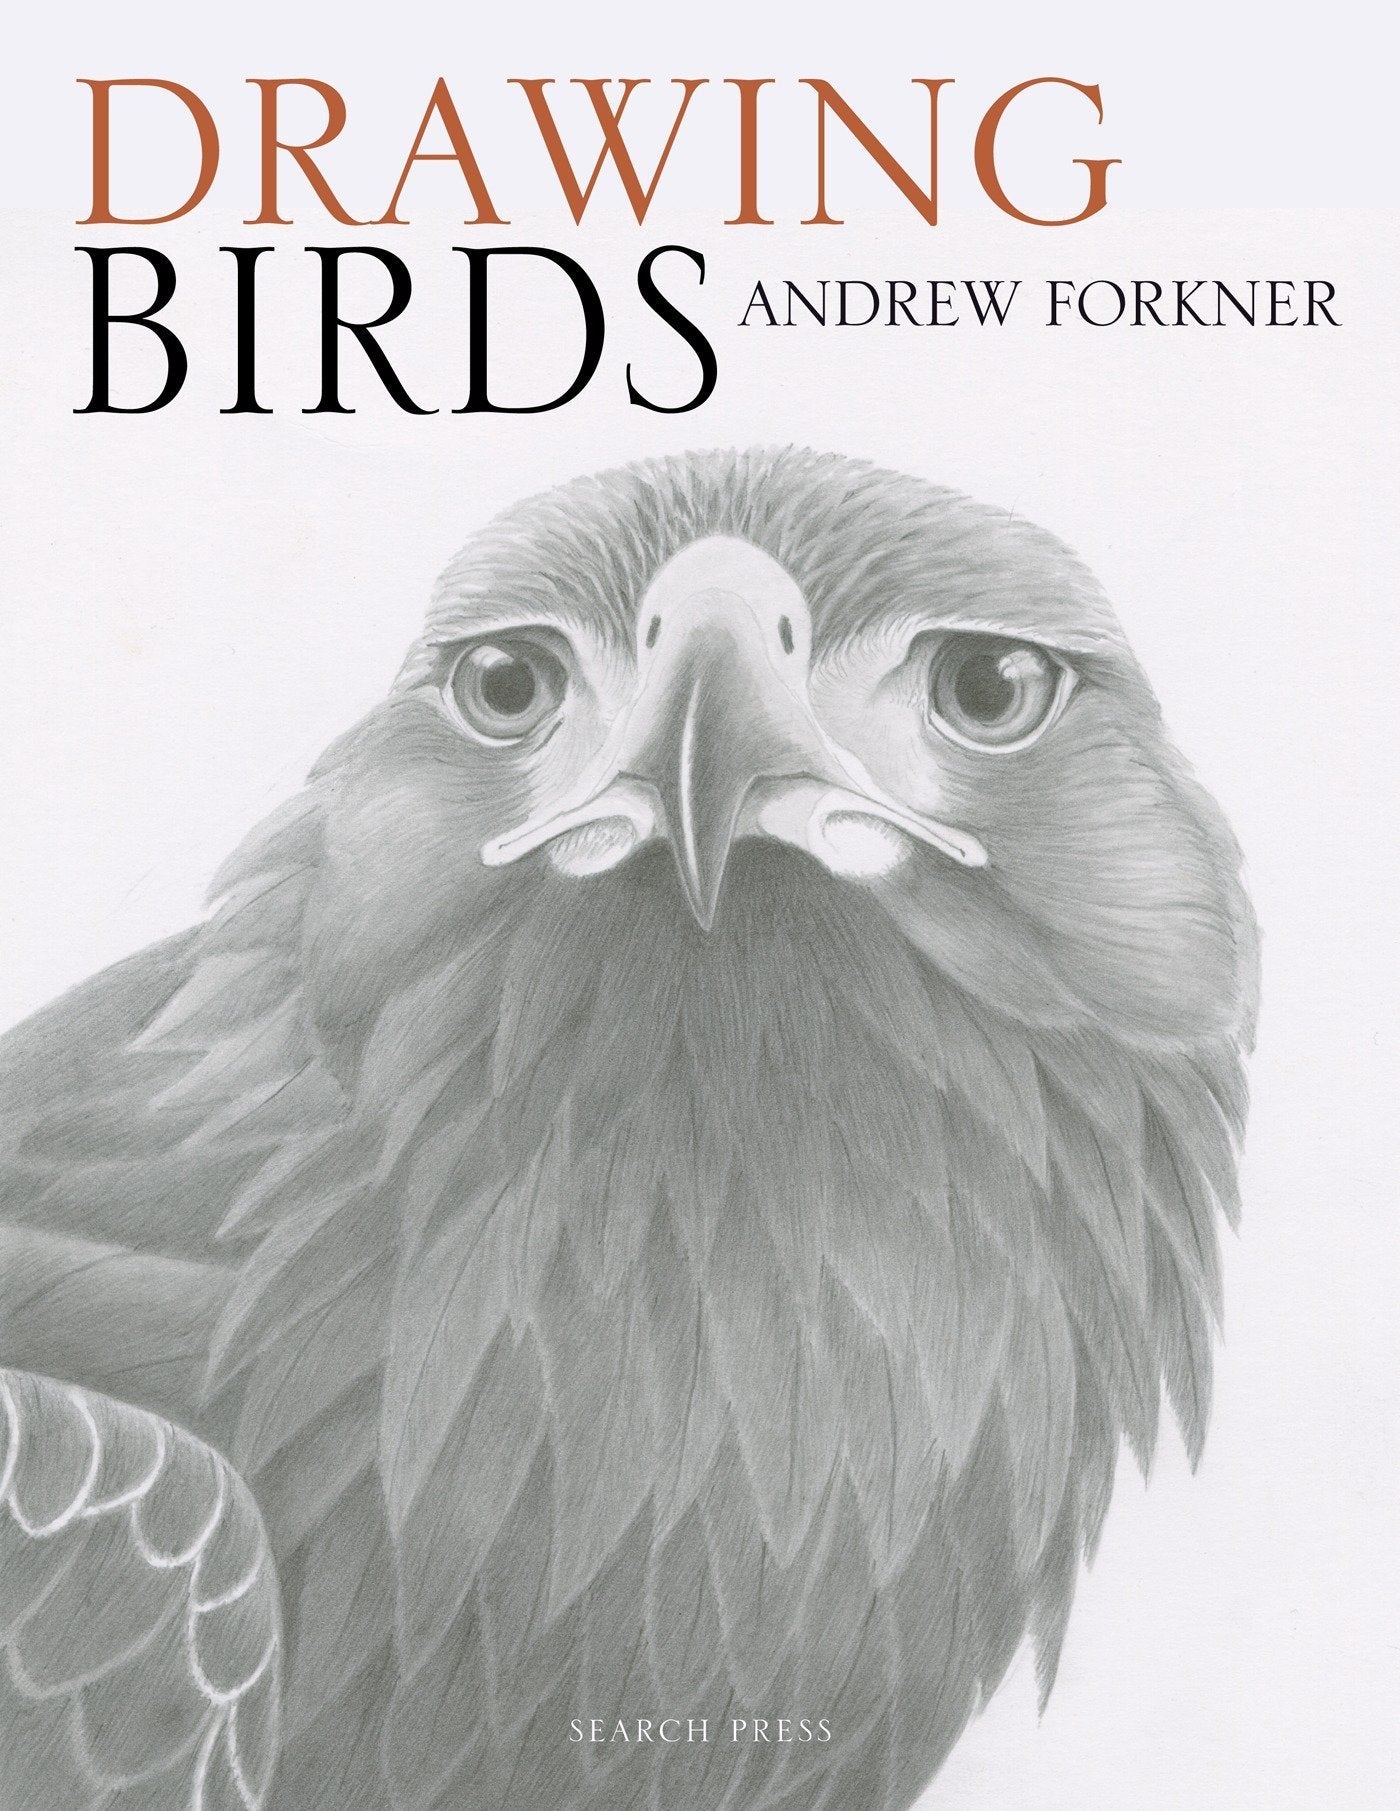 Drawing Birds - A. Forkner - Cover